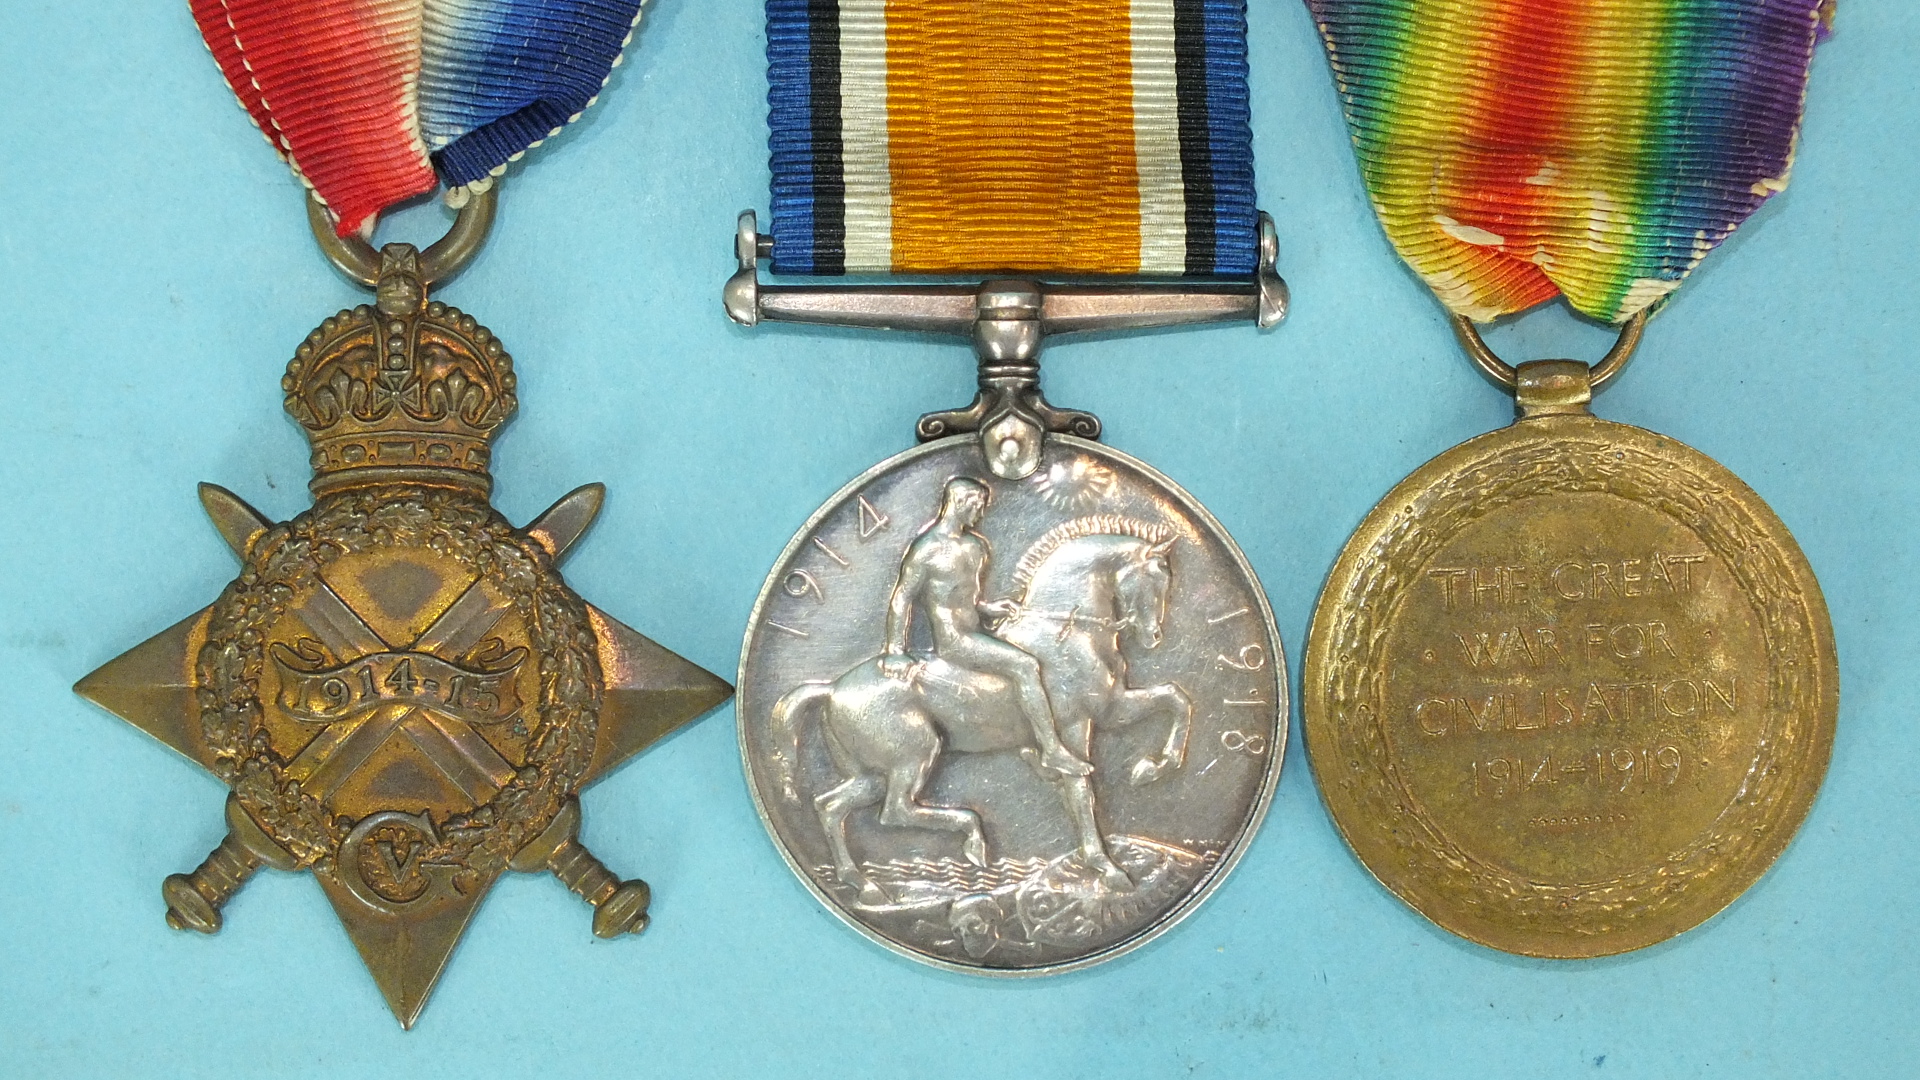 A WWI trio awarded to GS-10926 Pte T F Ridgeway R Fus: 1914-15 Star and British War and Victory